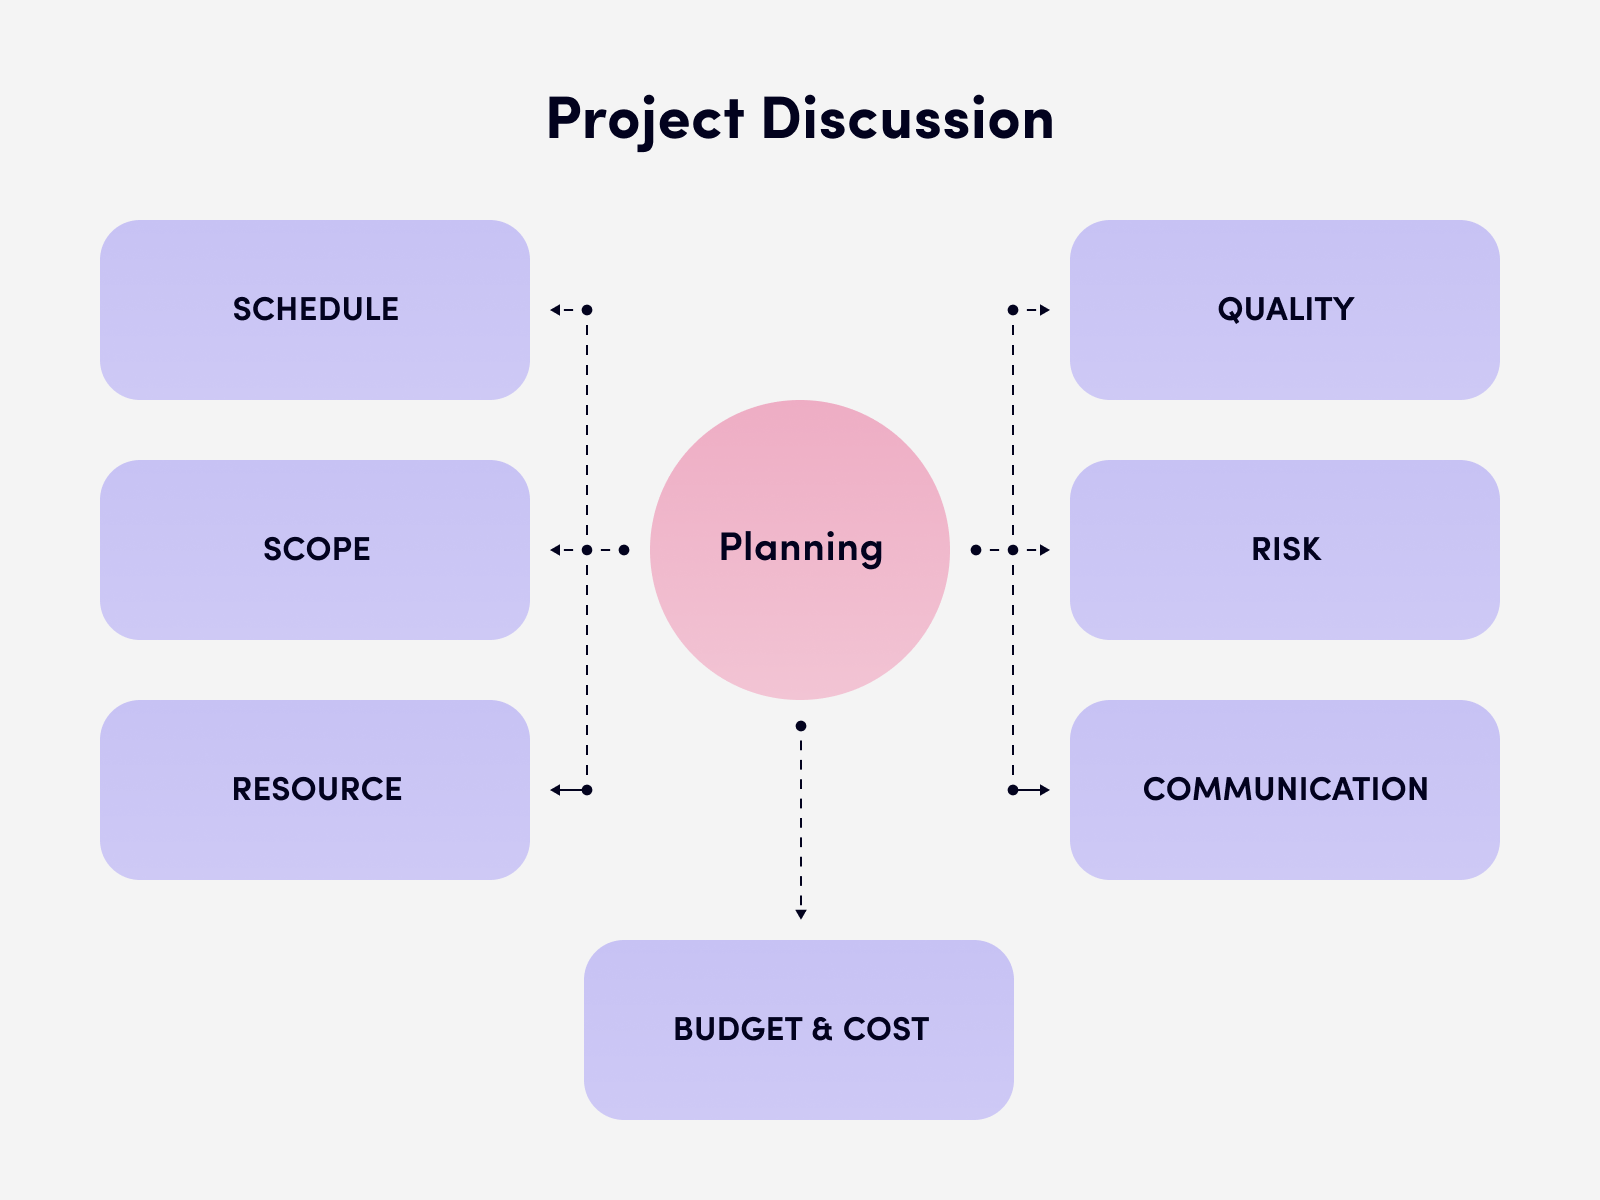 Discussing all the details before commencing a project is crucial for its success